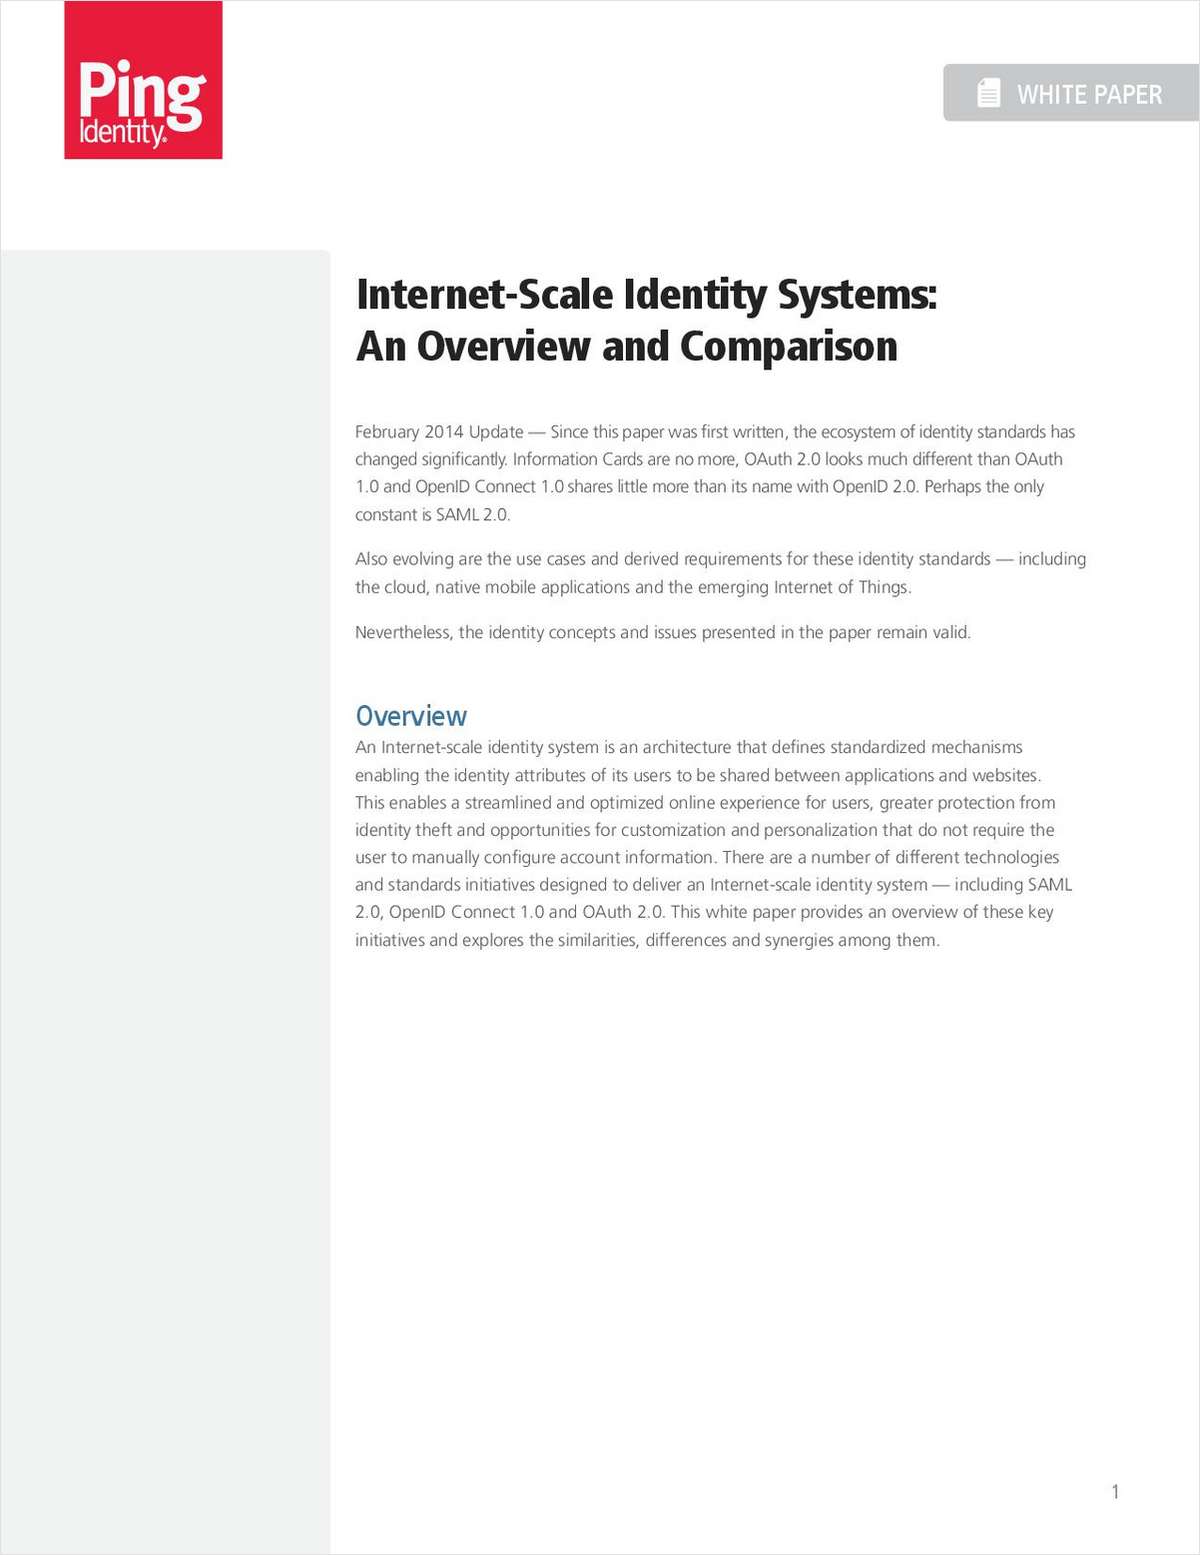 Compare Internet-Scale Identity Systems for The Best Identity Theft Protection